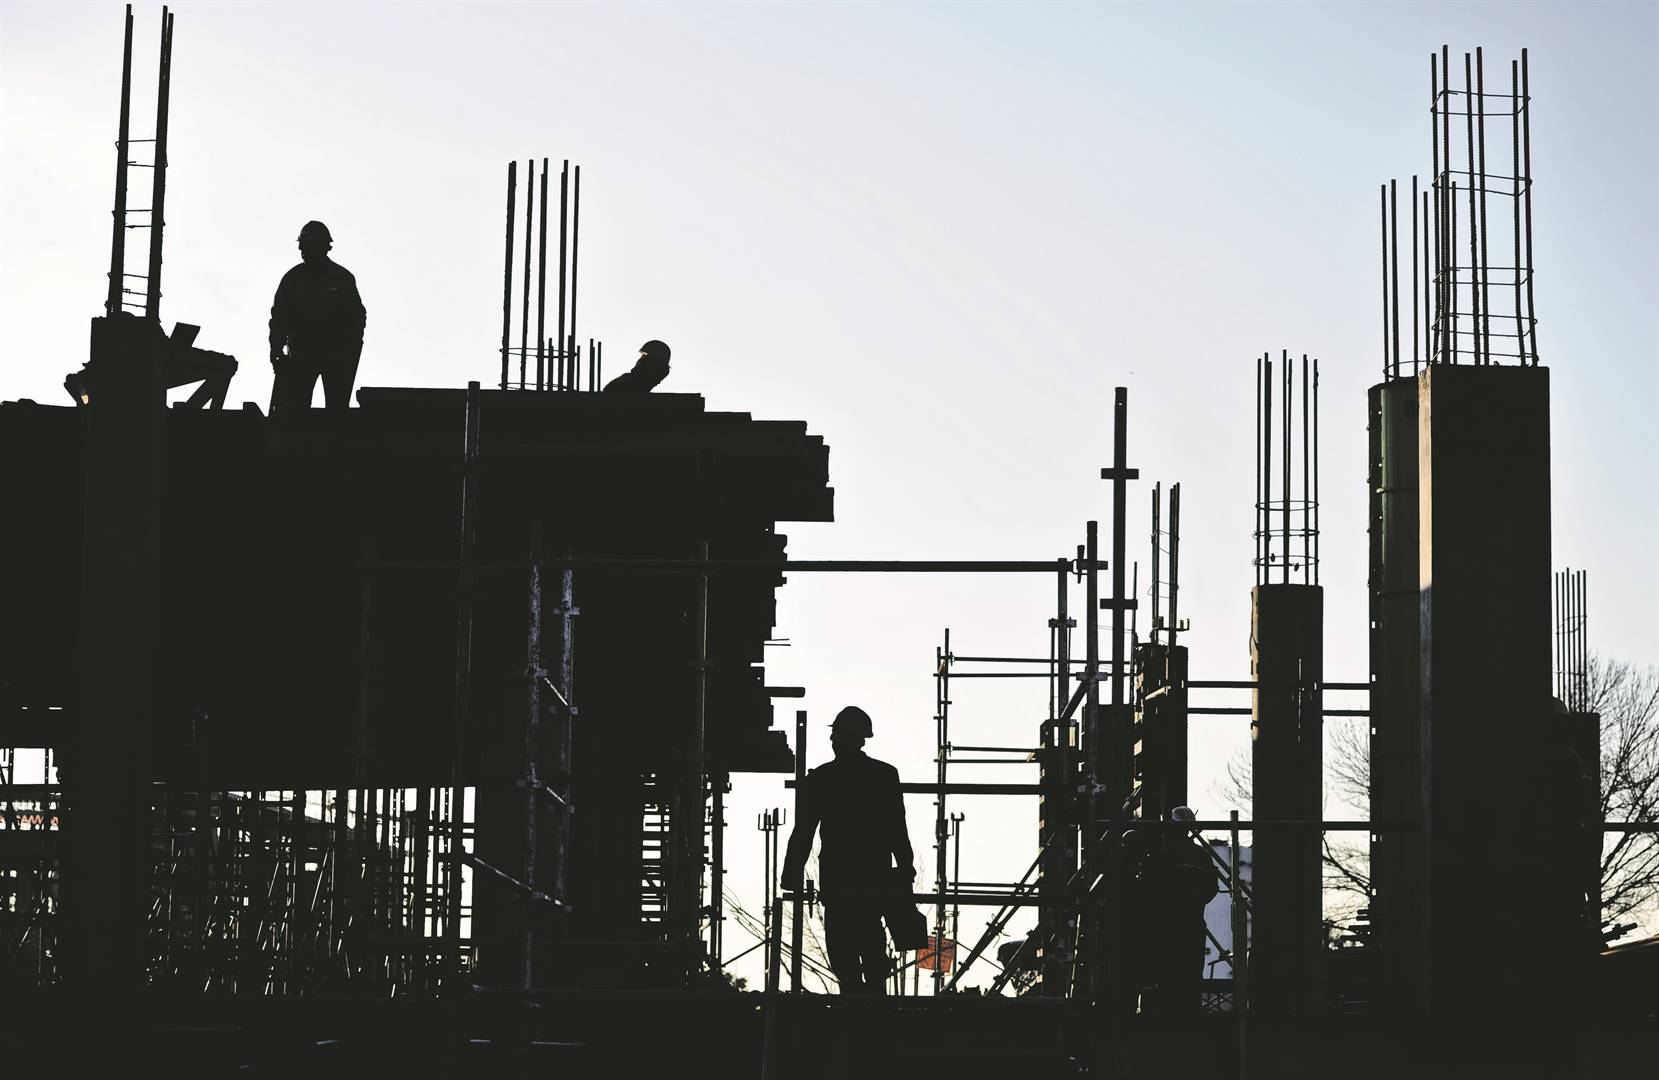 Construction is one of the biggest industries in SA, but without a clear plan on implementation, projects stagnate or don’t get off the ground at all.